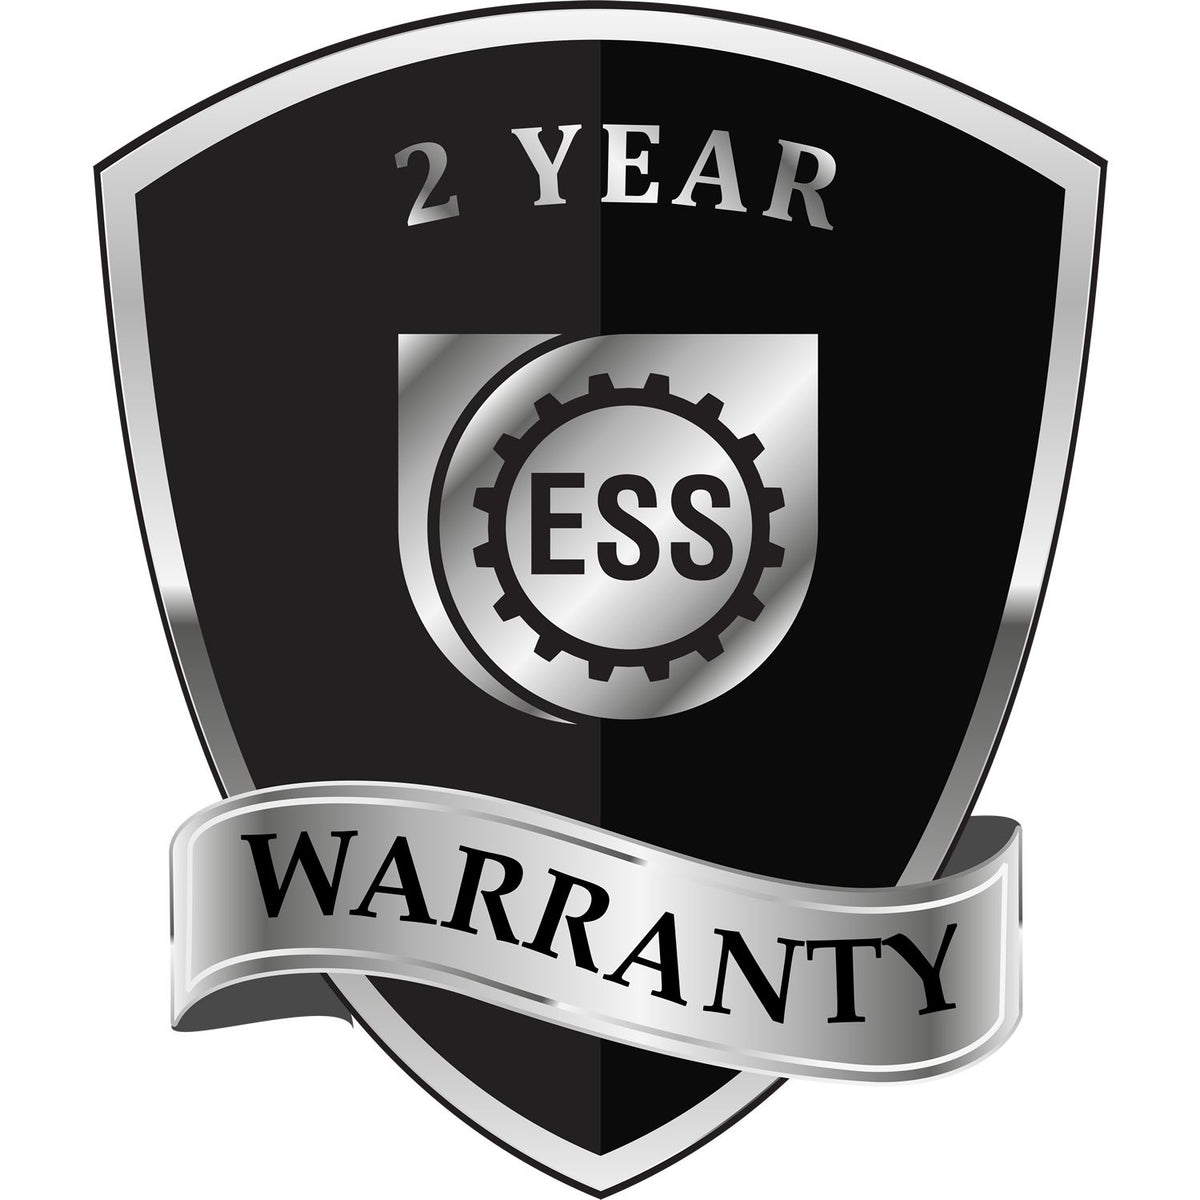 A black and silver badge or emblem showing warranty information for the State of Idaho Extended Long Reach Geologist Seal